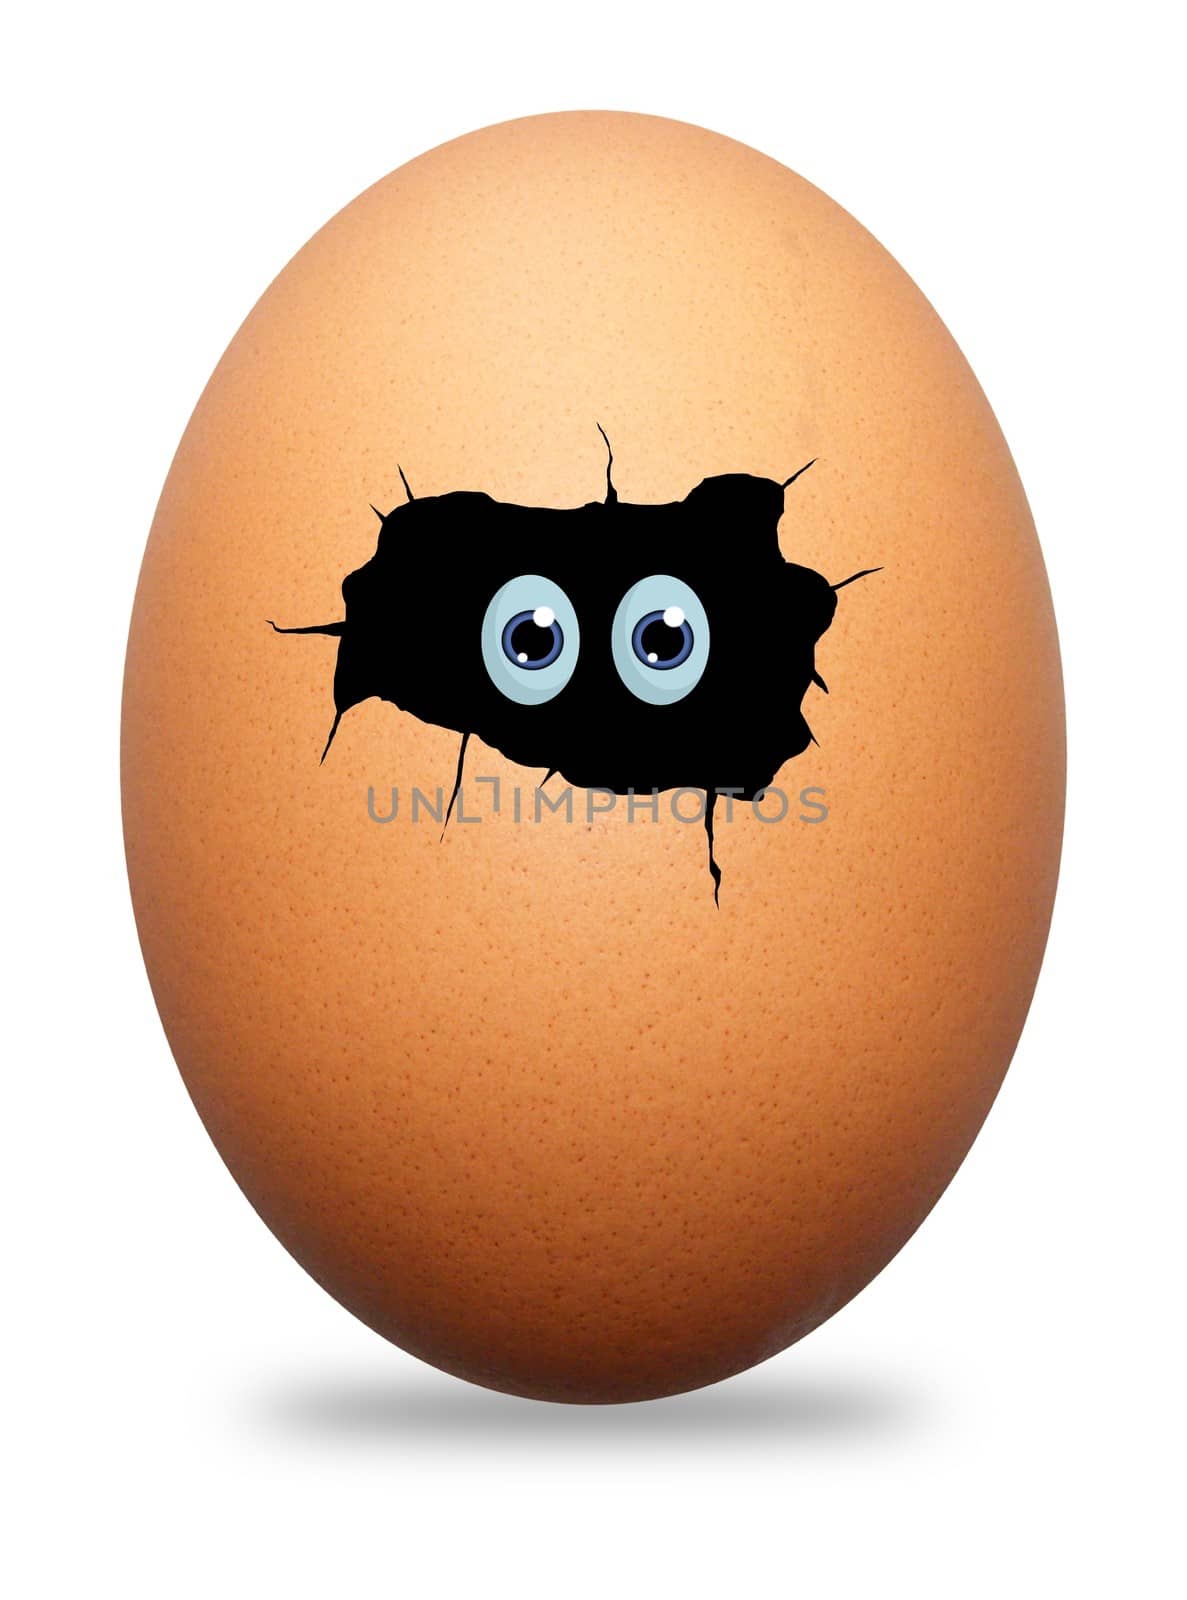 Illustration of an egg with eyes peeking out of a hole